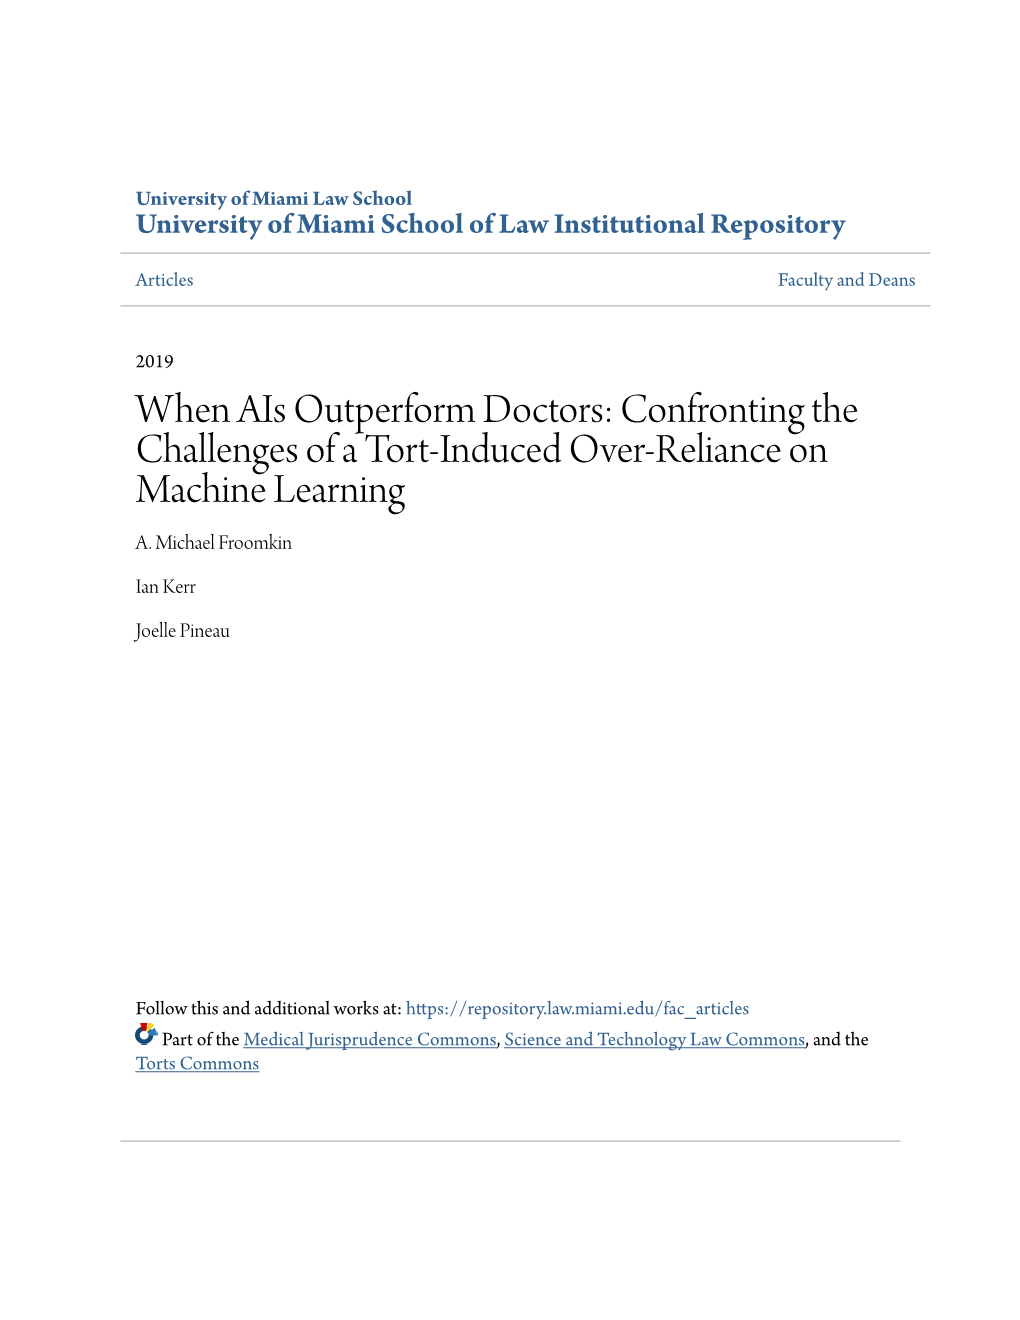 When Ais Outperform Doctors: Confronting the Challenges of a Tort-Induced Over-Reliance on Machine Learning A